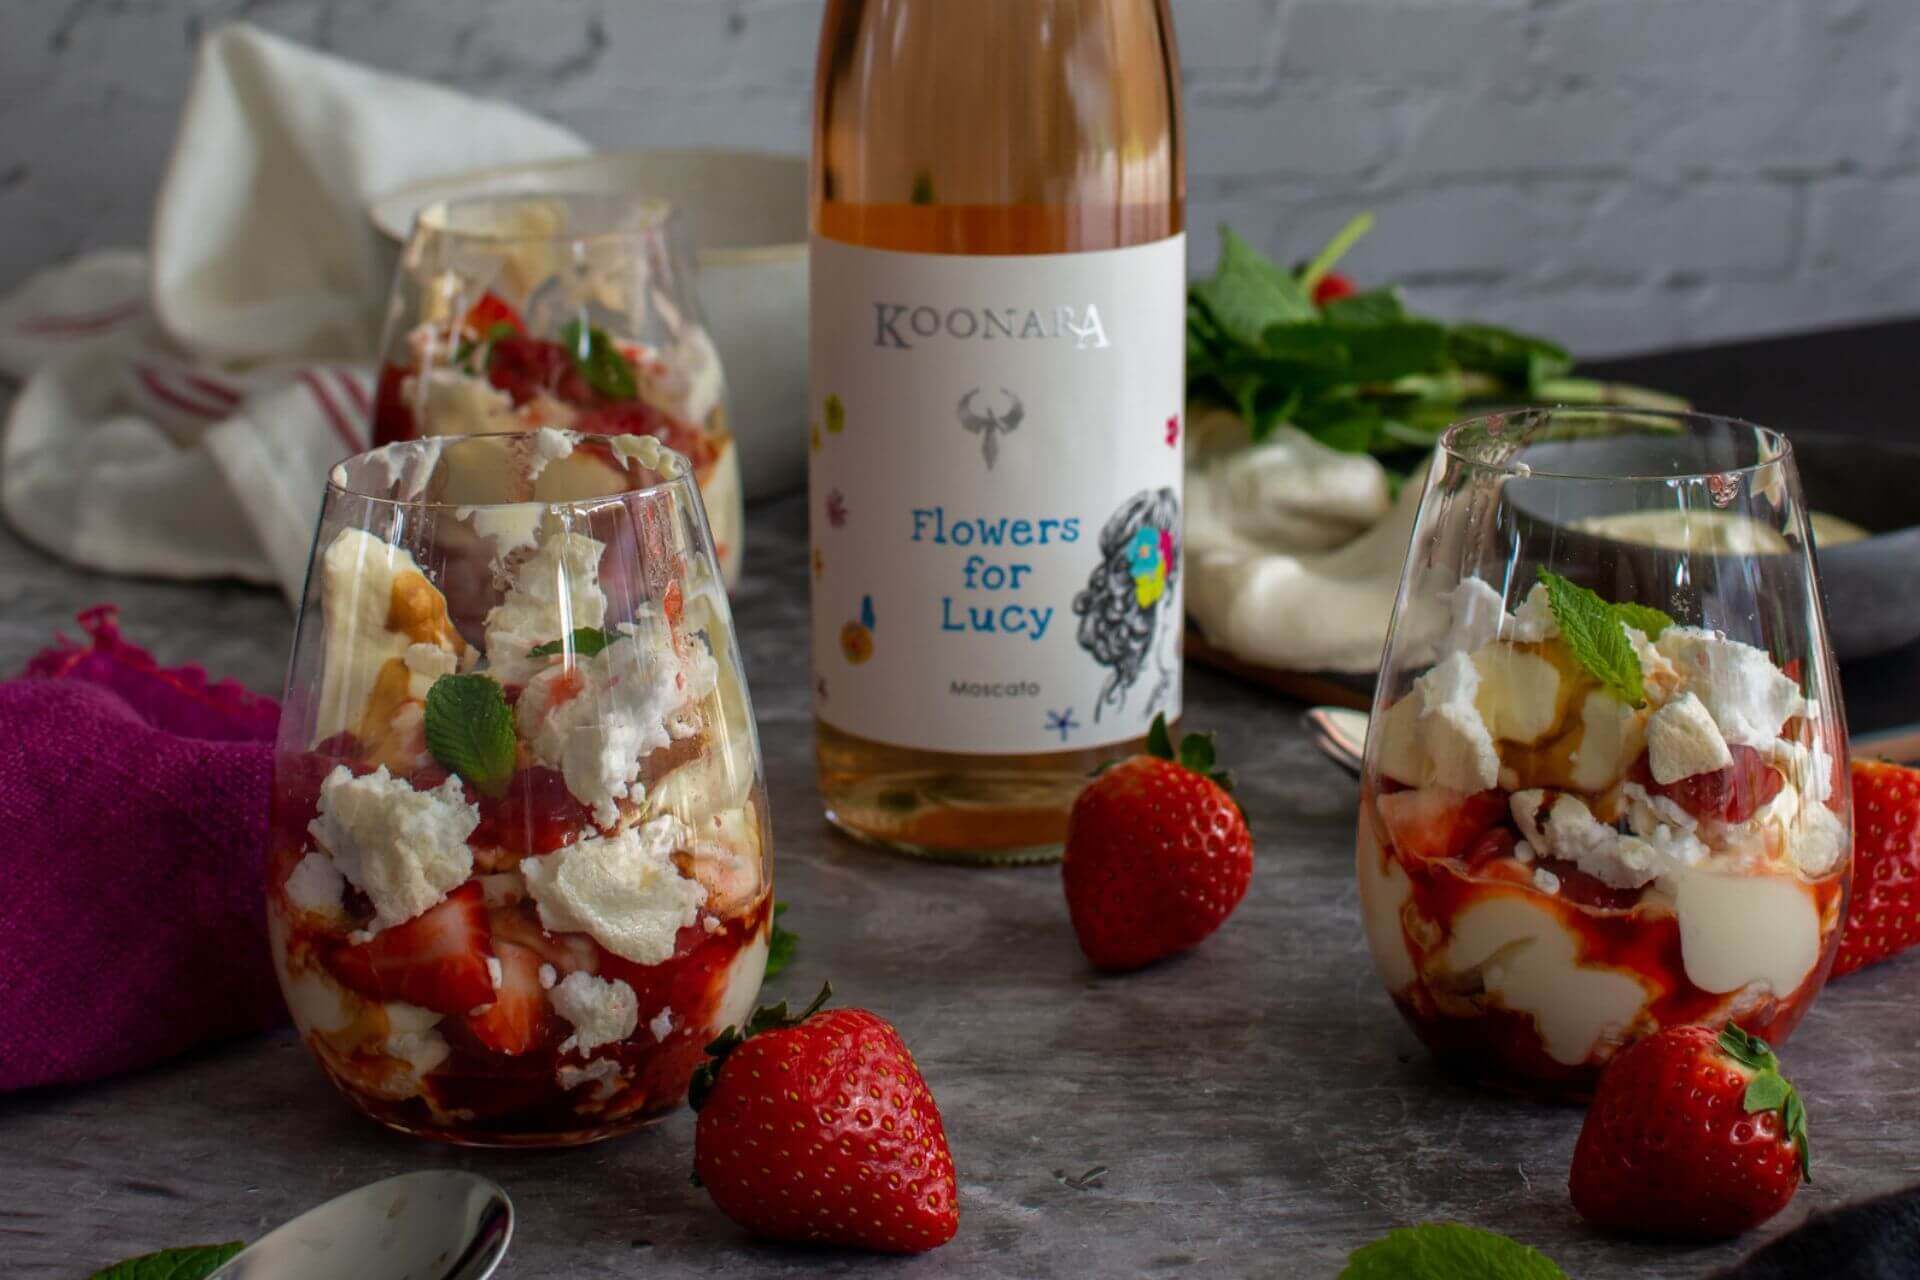 A bottle of Flowers for Lucy Moscato with 2 glasses of Eton Mess